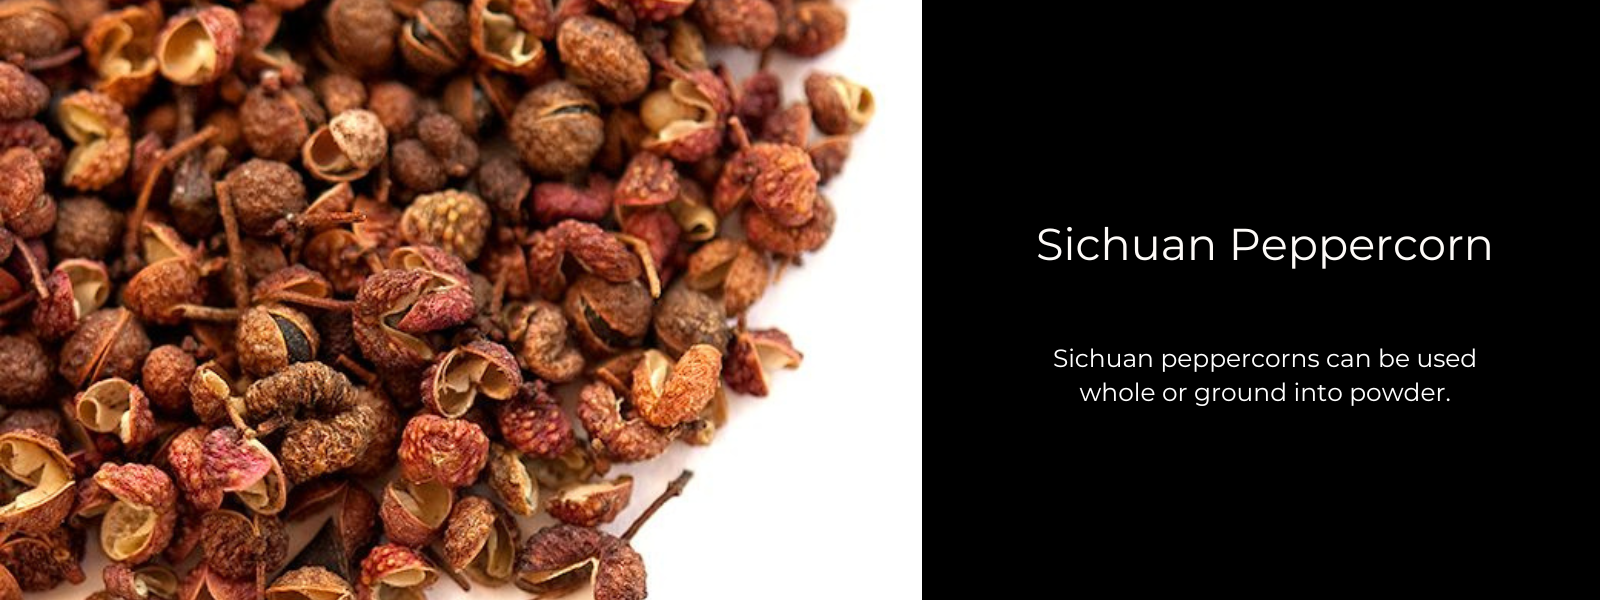 Sichuan Peppercorn - Health Benefits, Uses and Important Facts